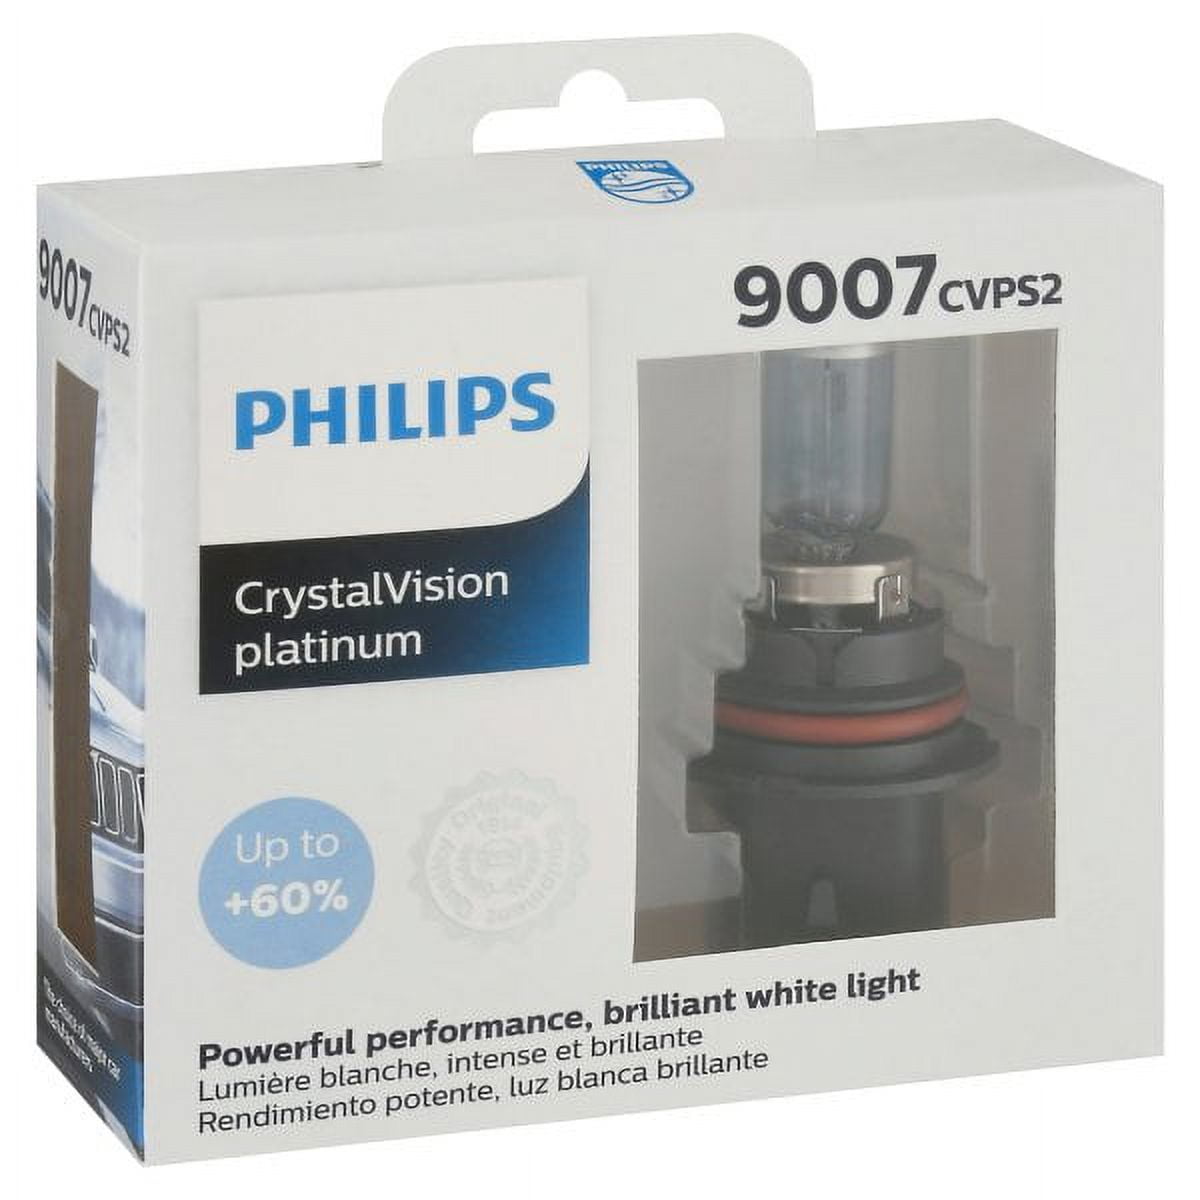 Philips H1 Whitevision Ultra luz blanca Philips